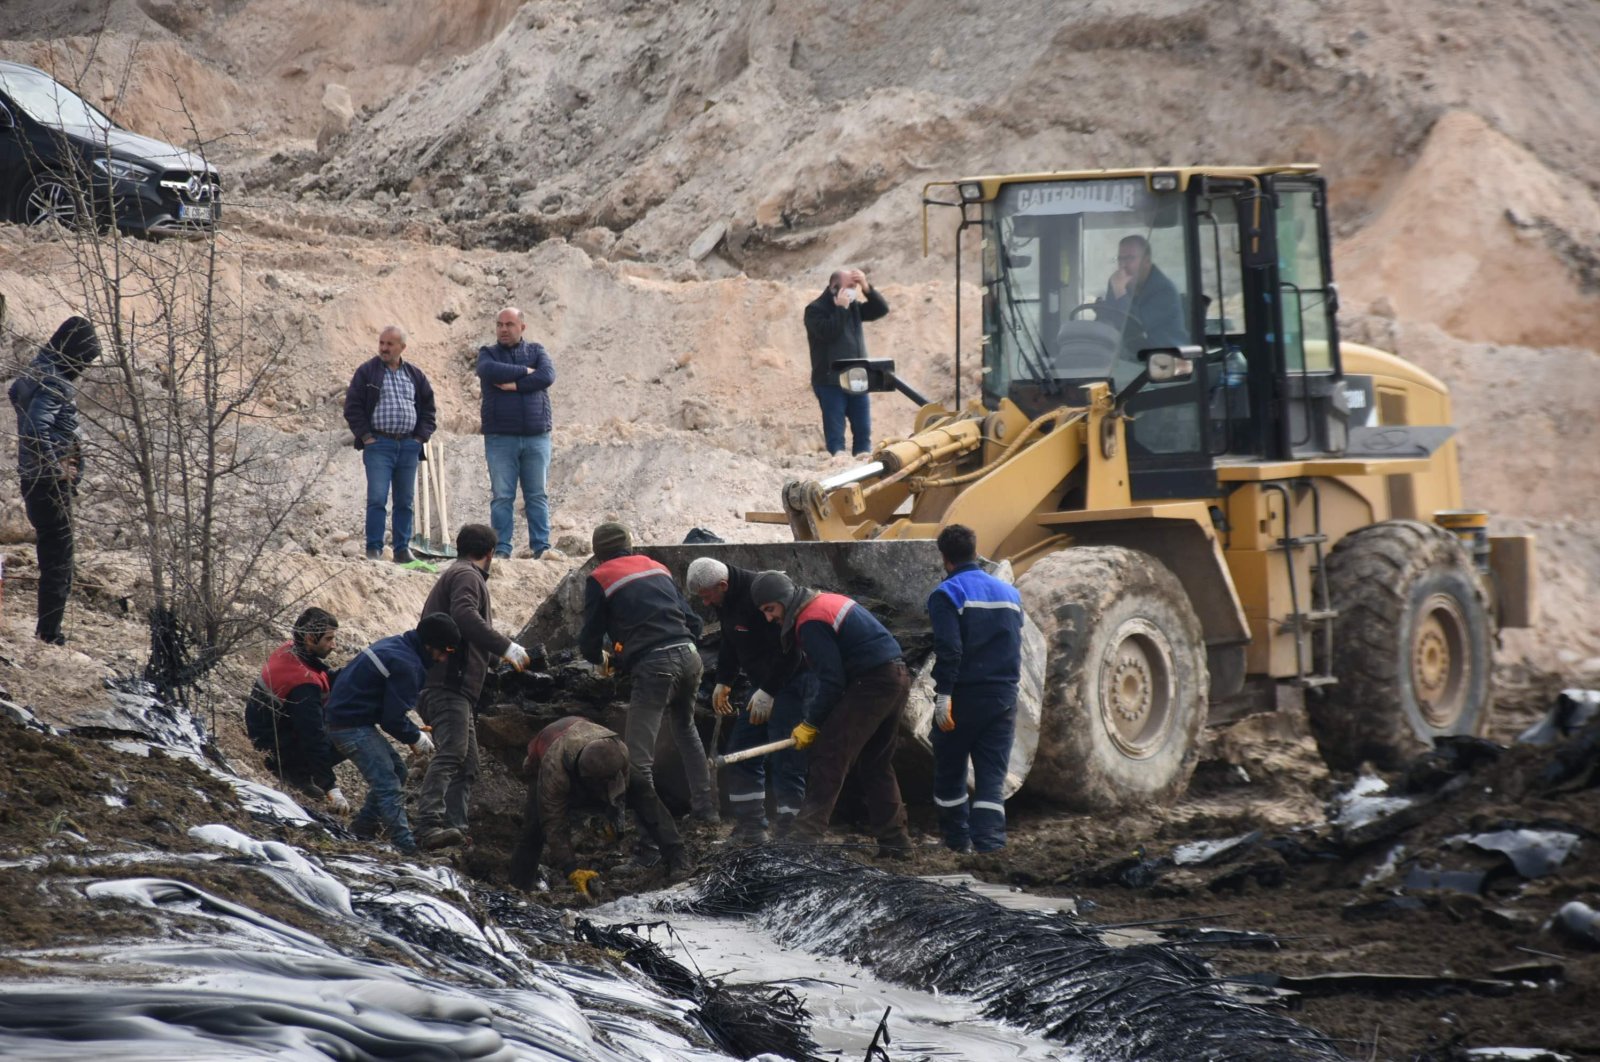 Efforts are underway to clean up tons of pitch spreading to farmlands following a leak at an asphalt construction site in Edirne, Turkey, April 7, 2022. (DHA PHOTO)